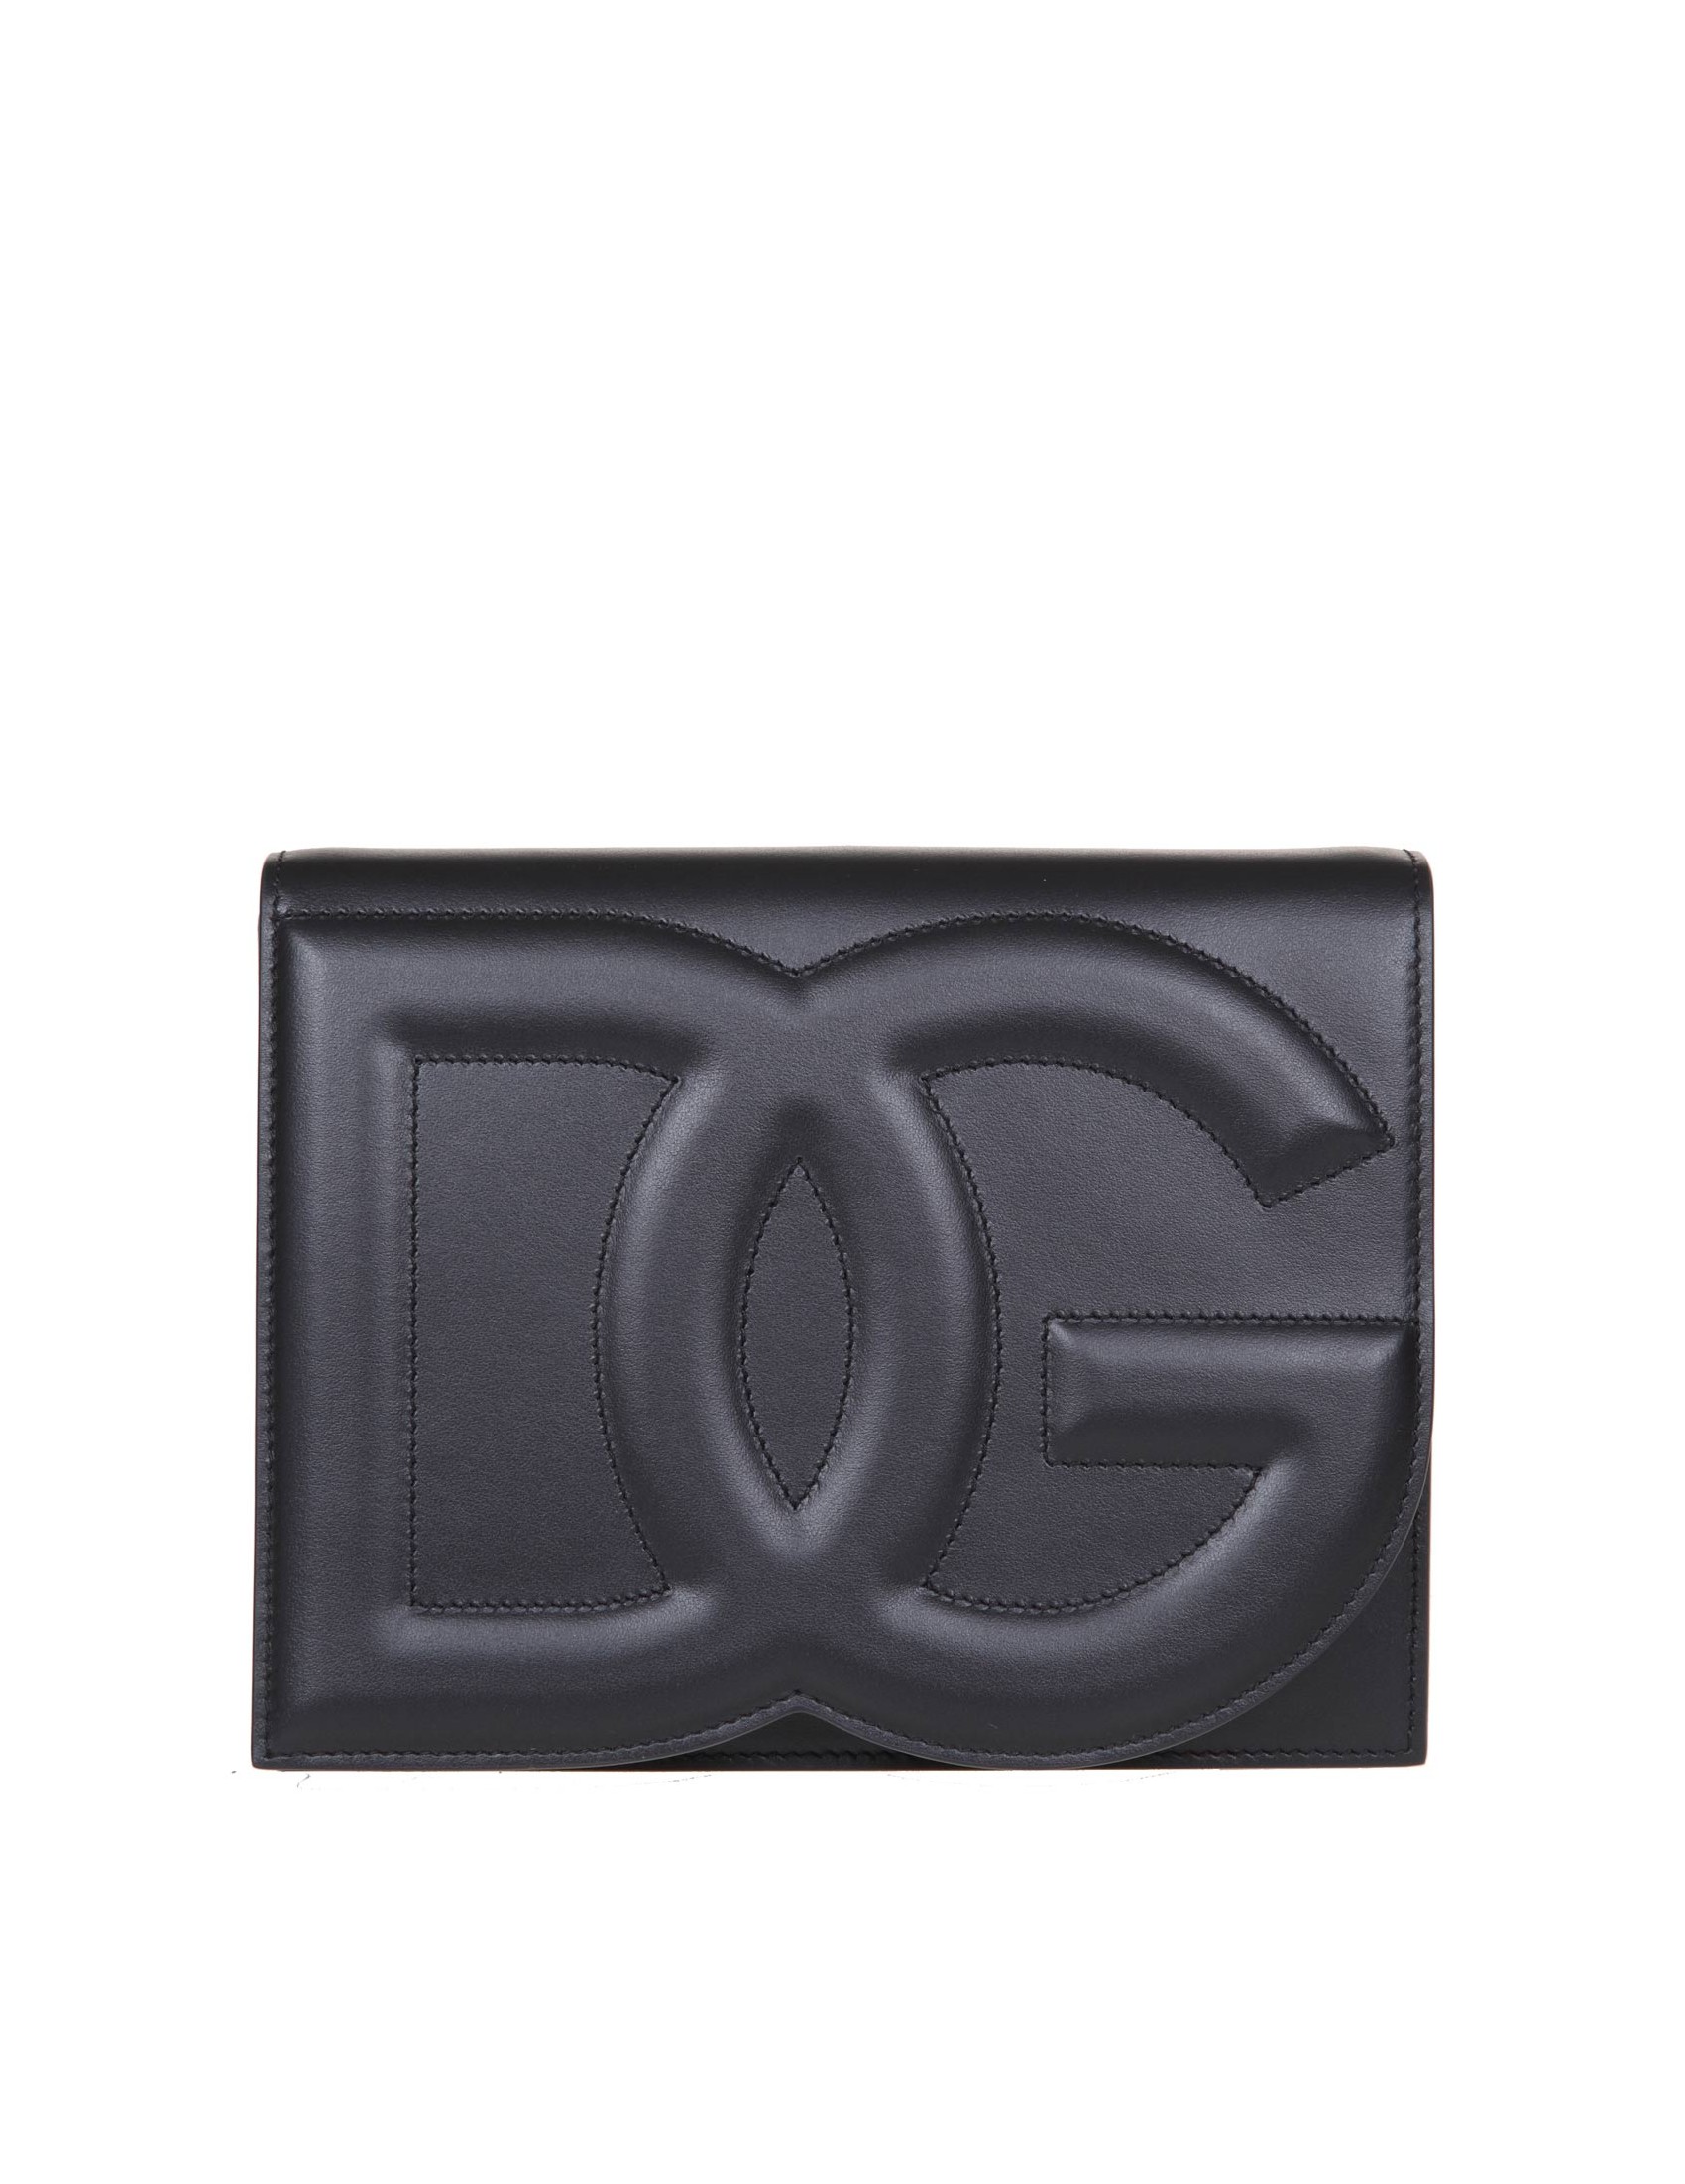 DOLCE & GABBANA CROSSBODY BAG IN LEATHER WITH LOGO